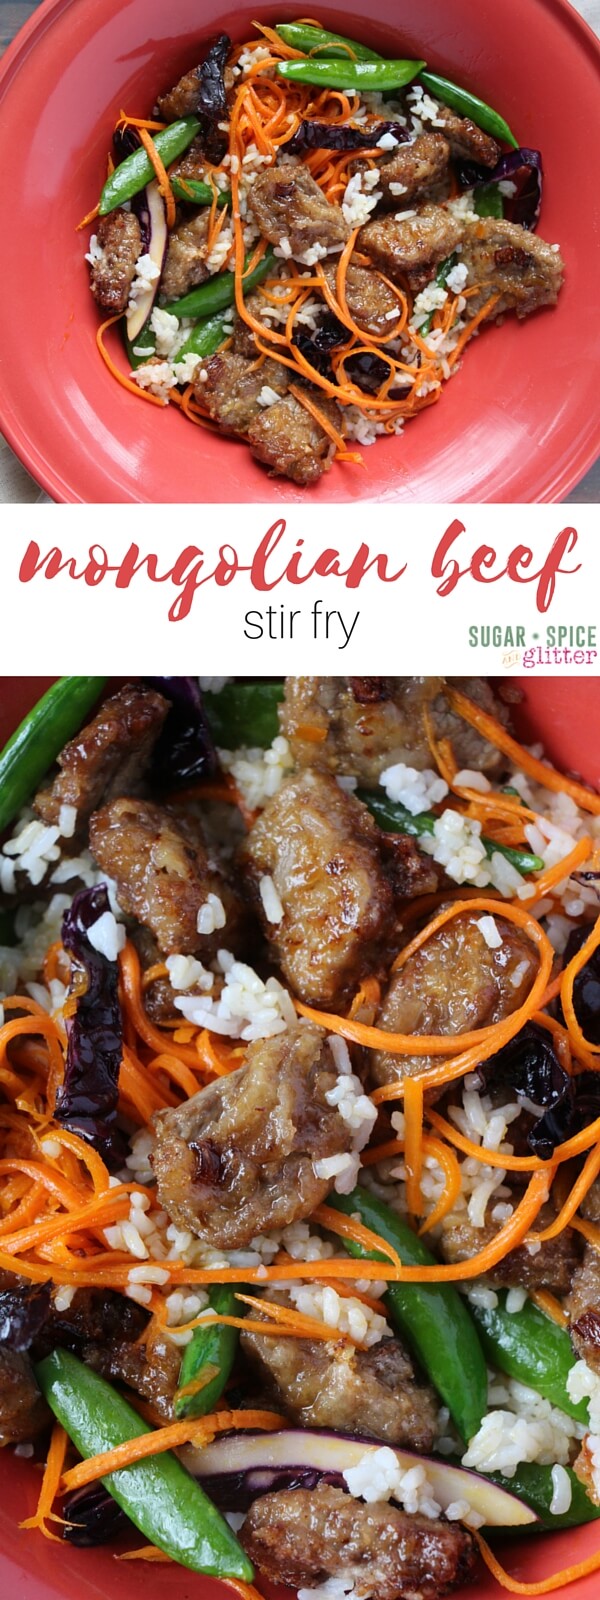 Healthy, family-friendly Mongolian beef stir fry. Crunchy, tender meat, fresh just-barely-cooked vegetables, and a light drizzle of sauce. A versatile recipe that is great for beginners to cooking Asian recipes, this recipe explains how to make the dish more palatable for kids or more spicy for grown-ups.